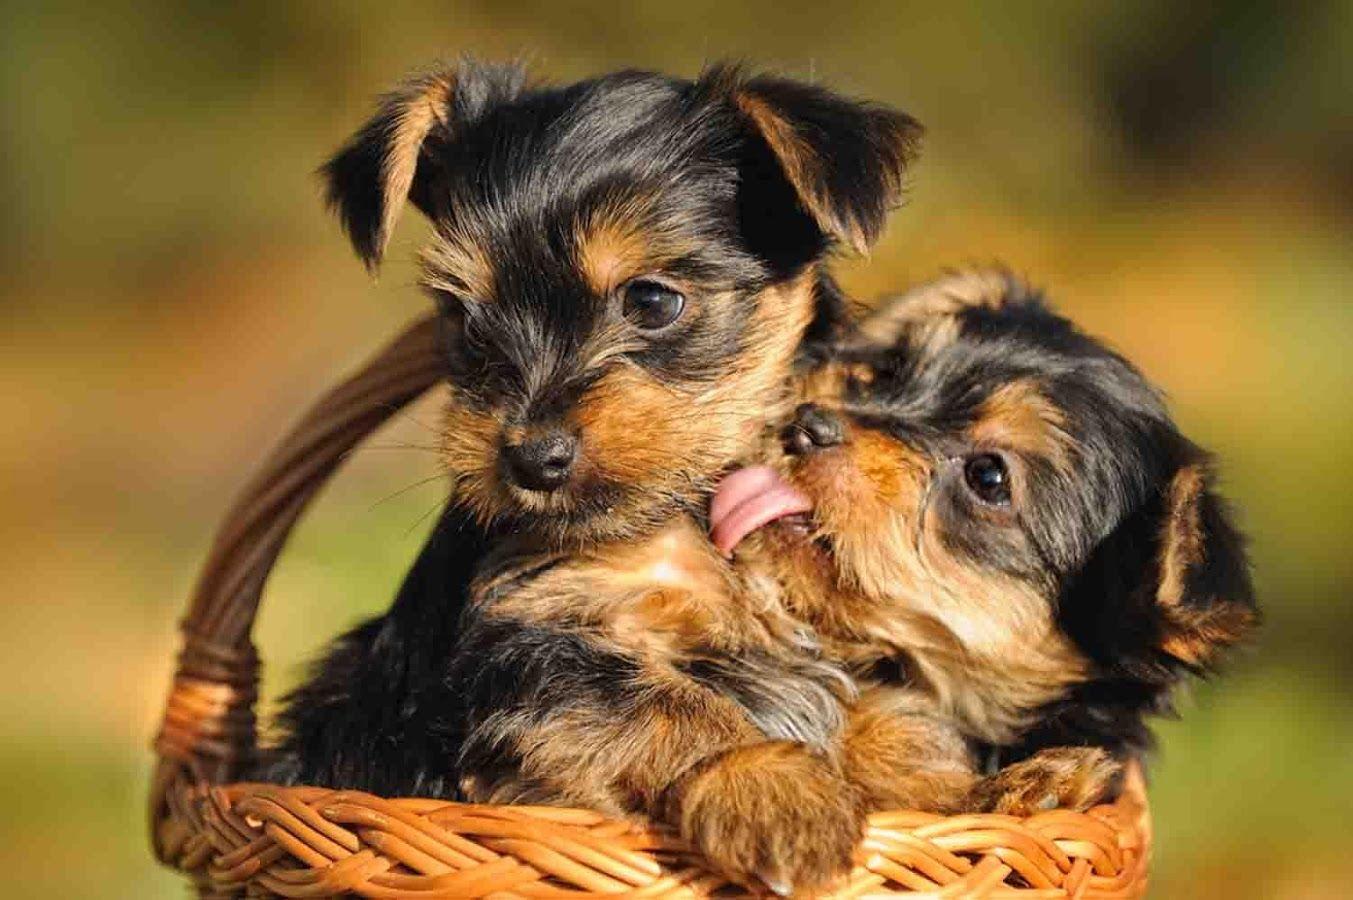 Furry Babies Has the Cutest Yorkie Puppies Anywhere, Come